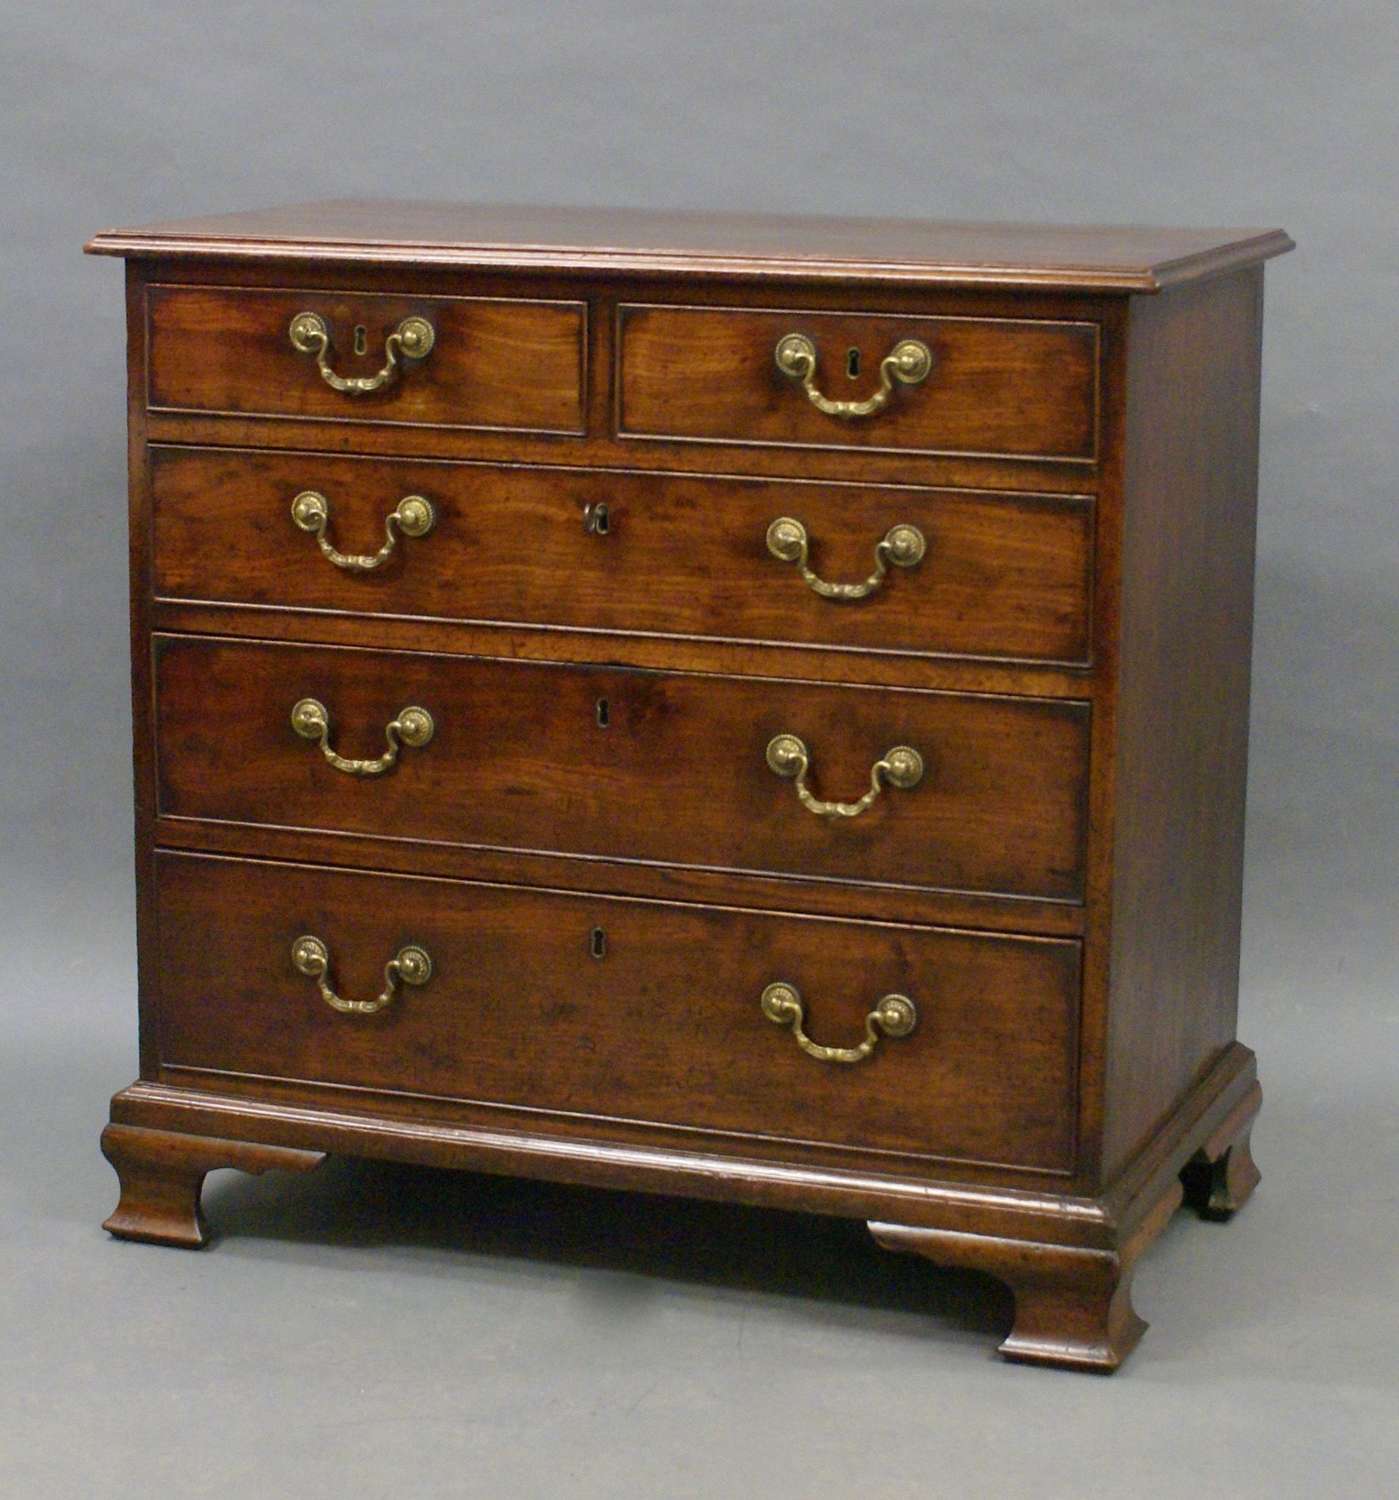 A George III  period mahogany small chest of drawers